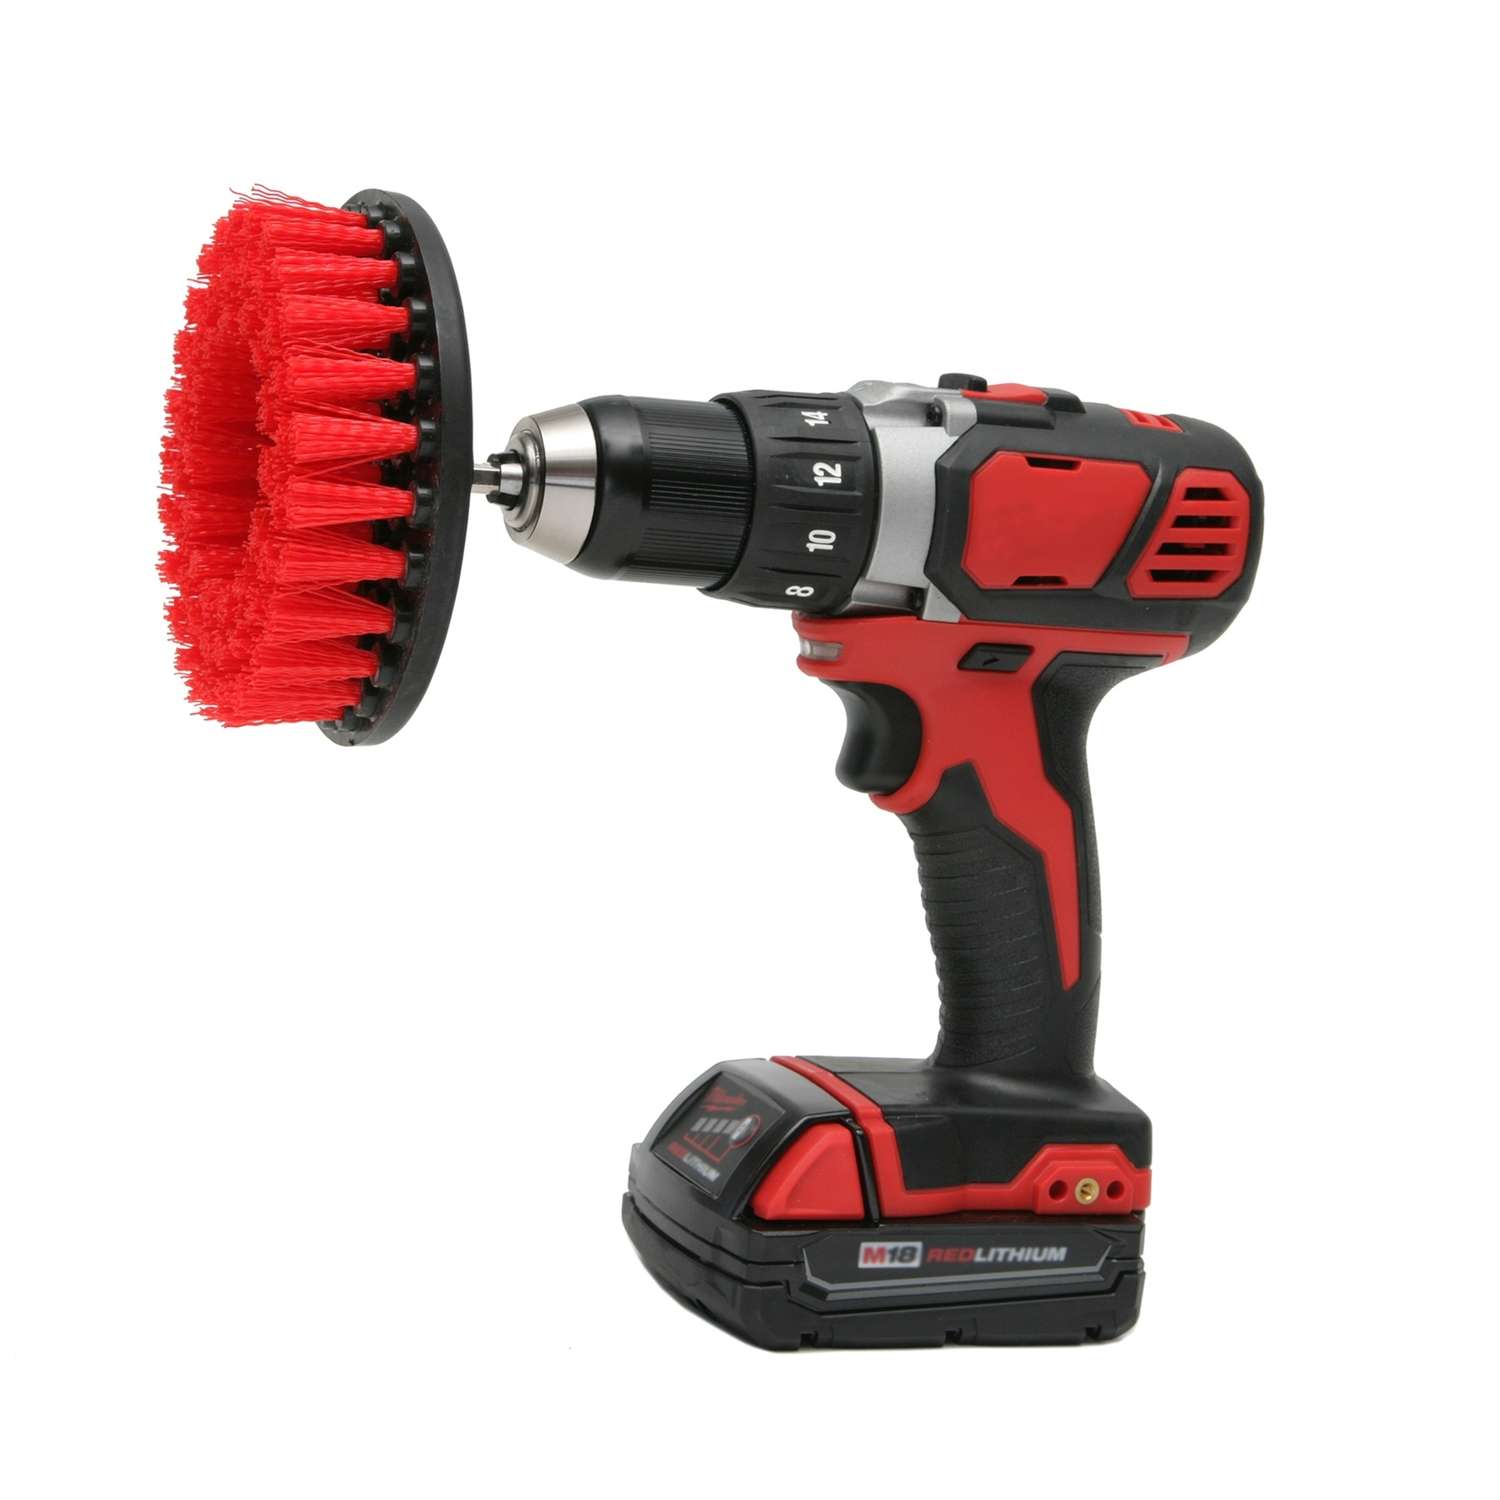 Buy online Nylon Drill Brush for power cleaning and brushing, fix in a drill  driver and wash